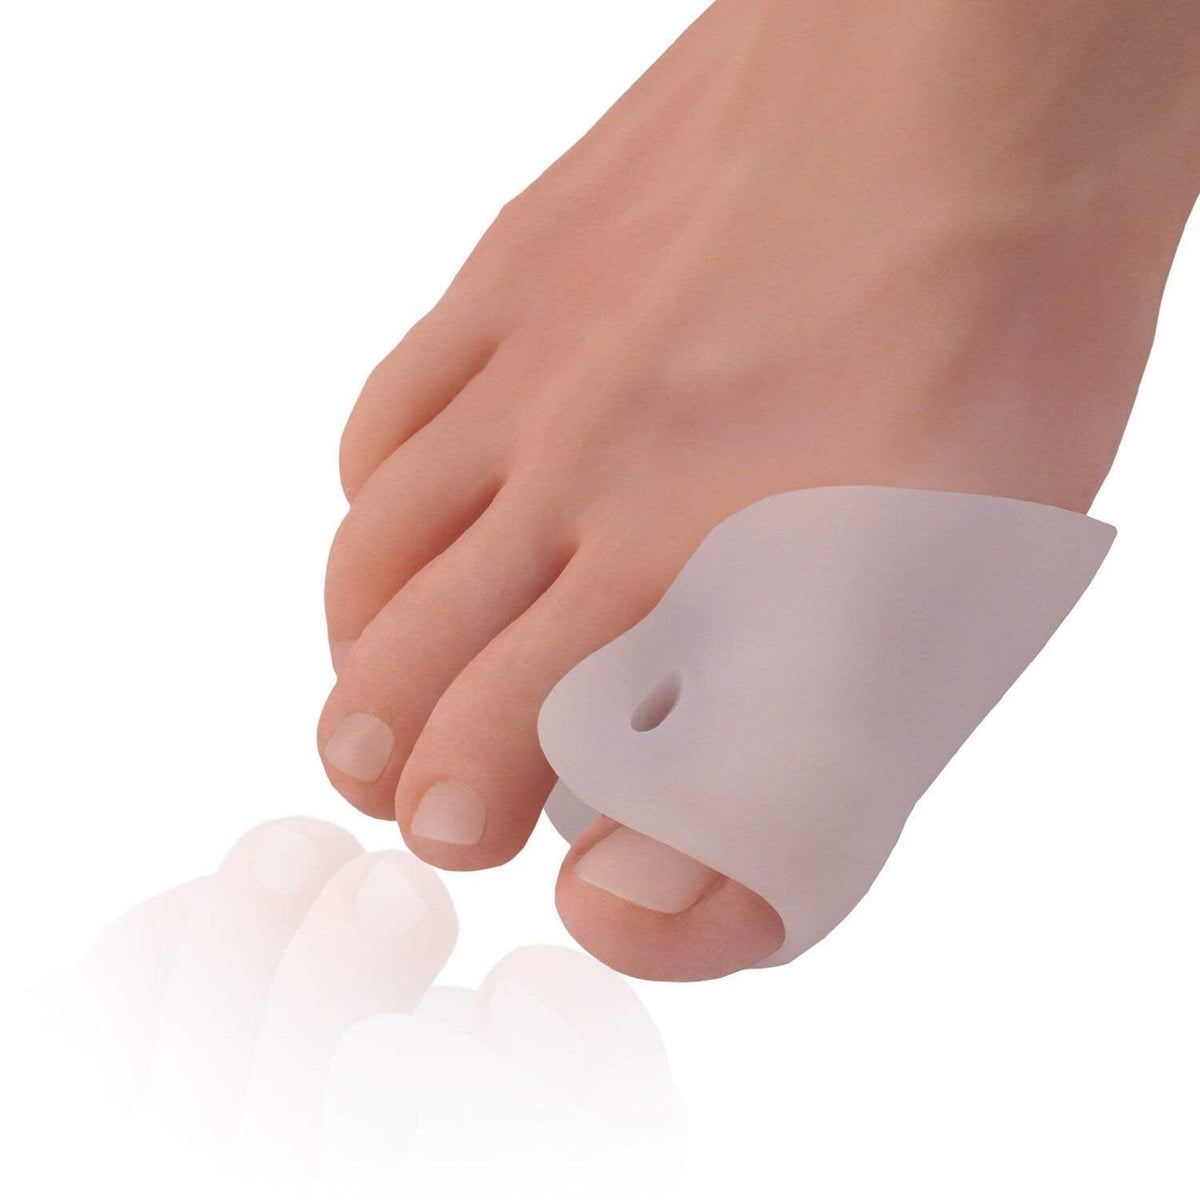 Dr. Frederick&#39;s Original Covered Toe Spacers - Gel Shields - 4 Pieces - Bunion Pain Relief Foot Pain Dr. Frederick&#39;s Original 